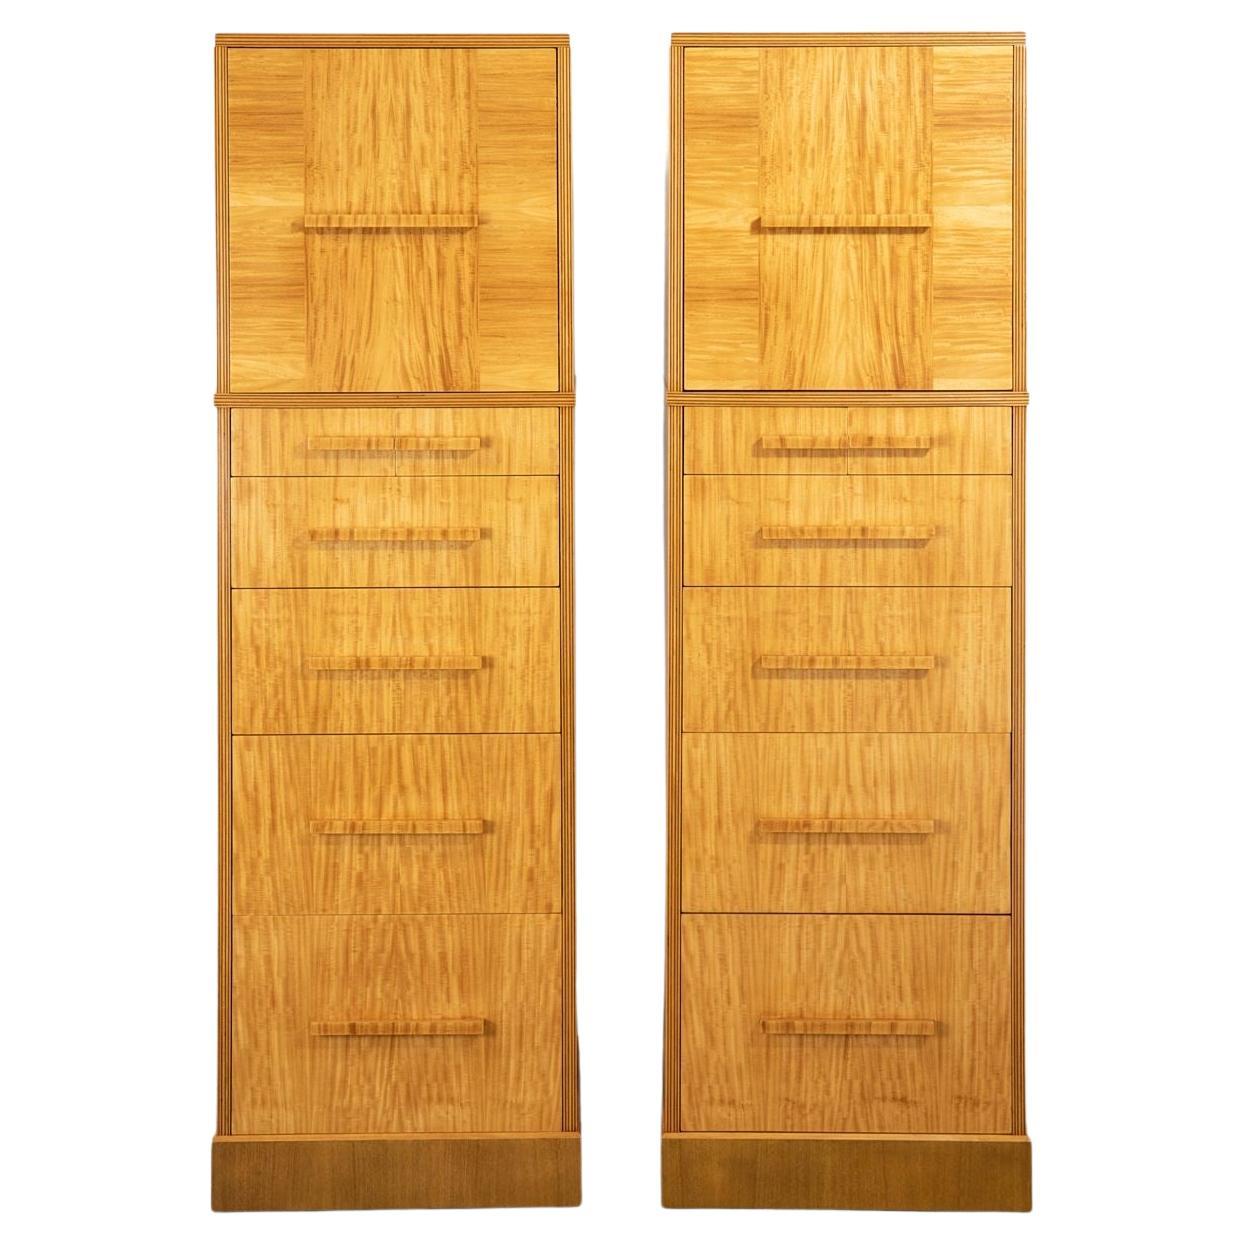 Donald Deskey Art Deco Skyscraper Dressers in Highly Figured Avodire 1940s Pair For Sale